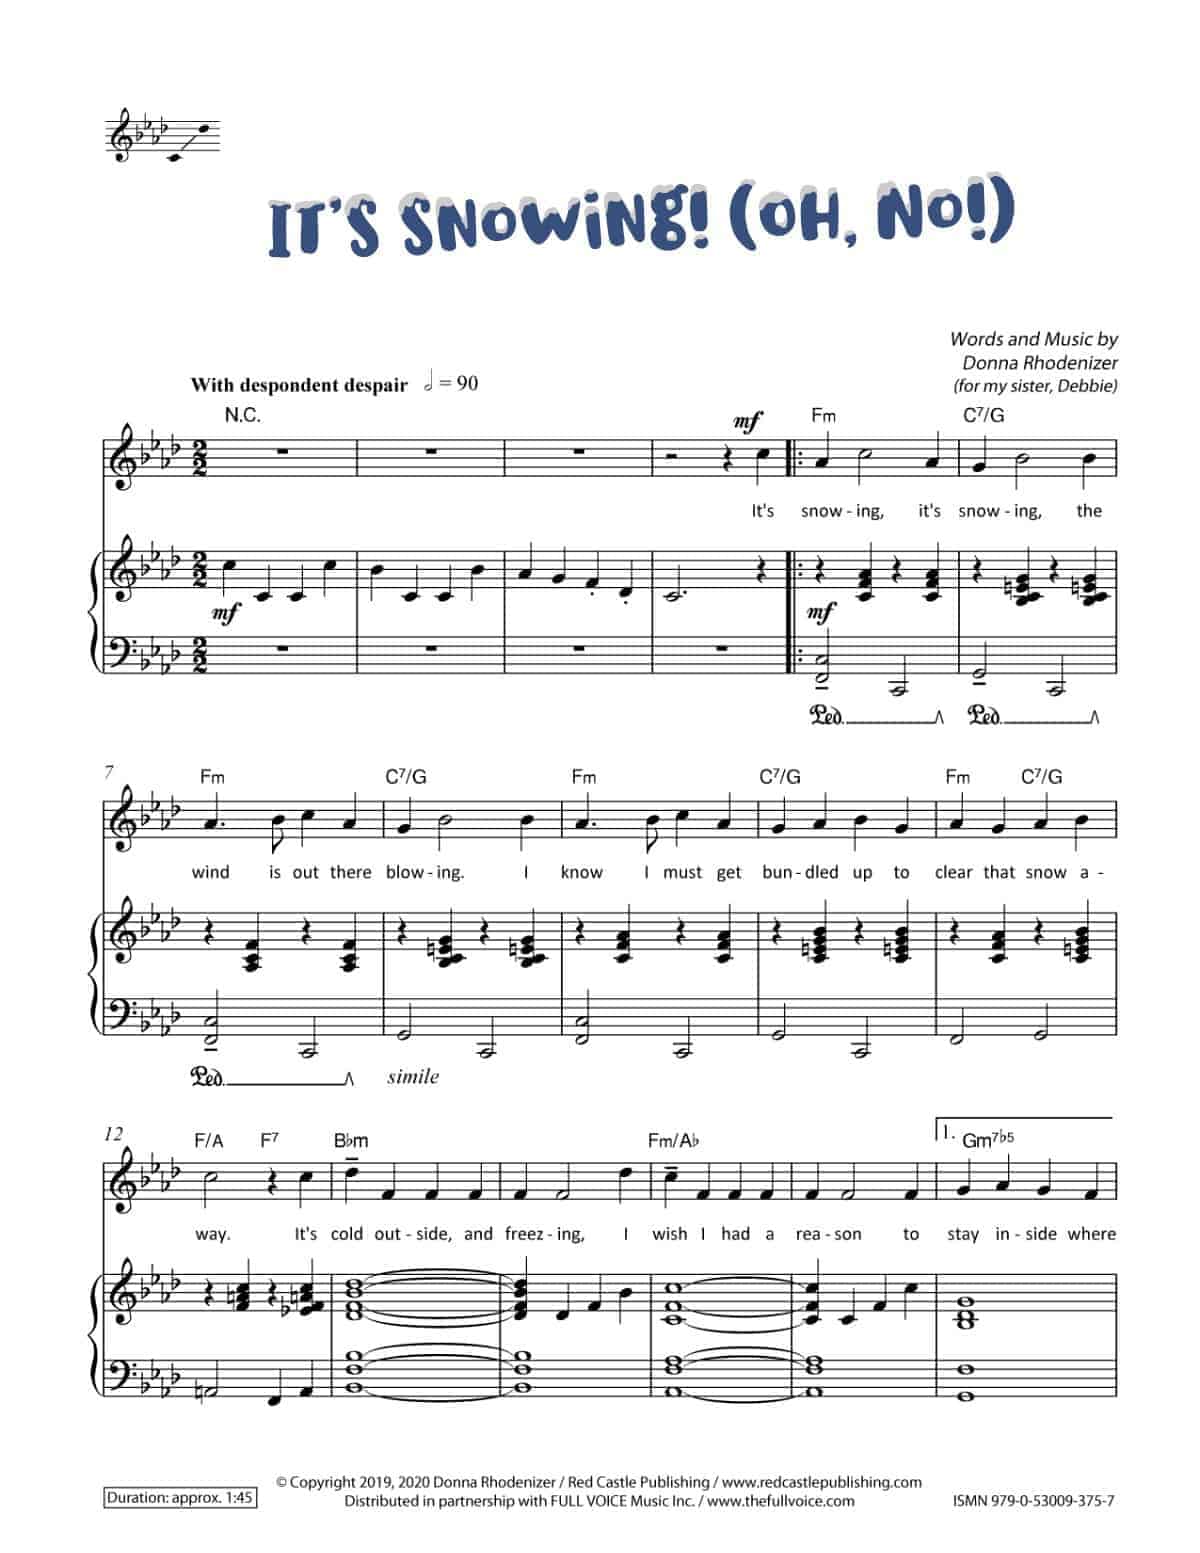 It’s Snowing! (Oh, YES!/Oh, No!) by Donna Rhodenizer